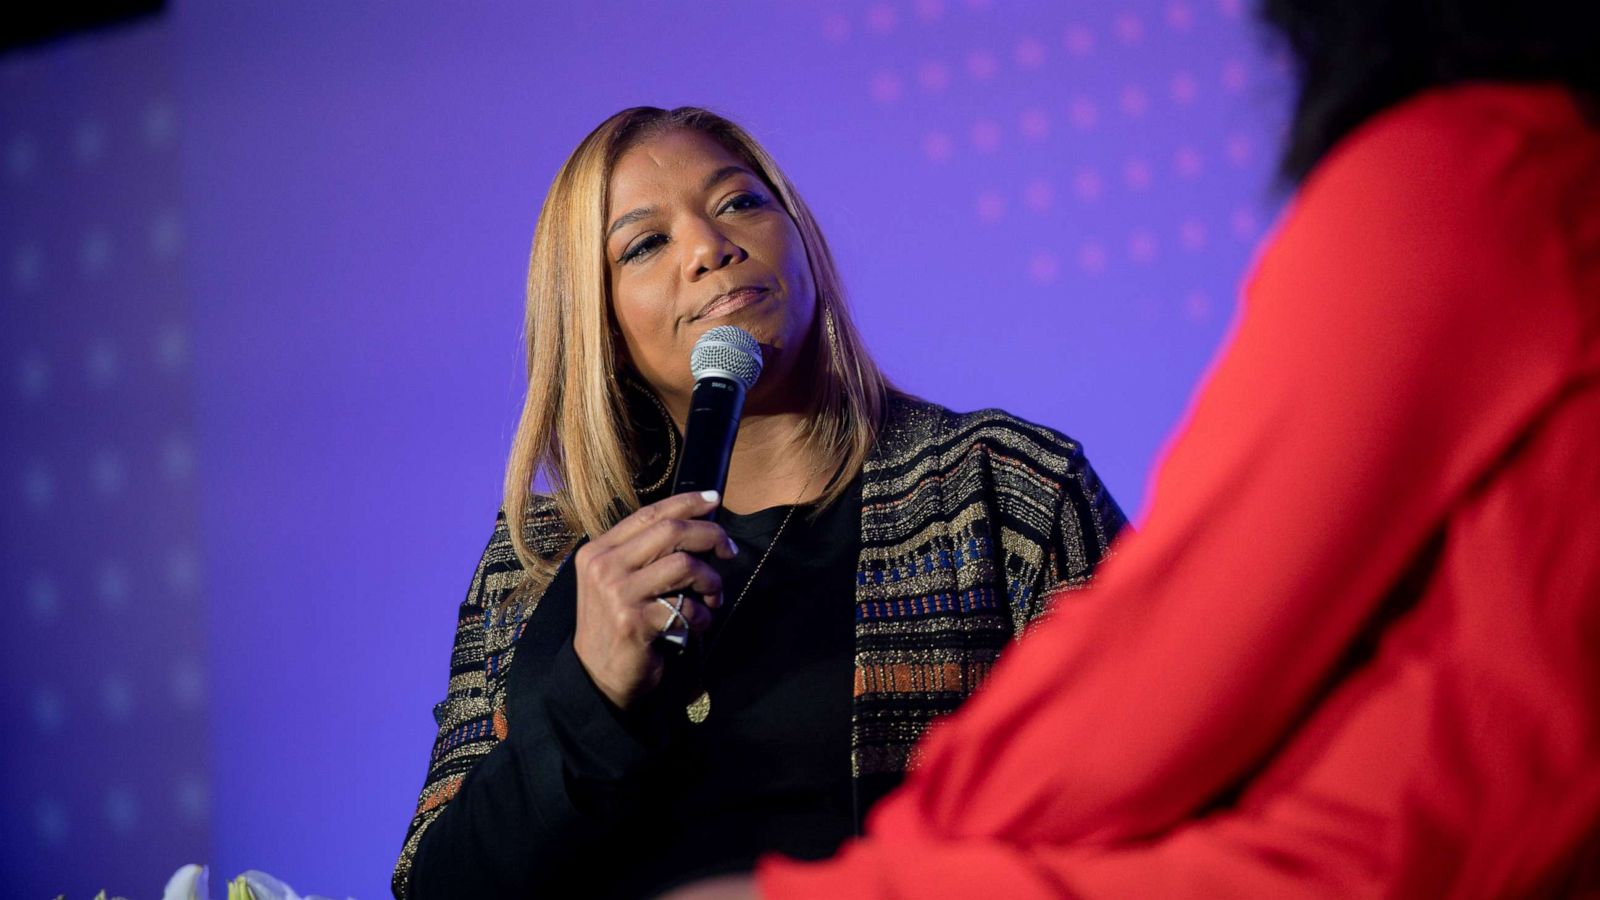 Queen Latifah weighs in on Gone With the Wind controversy: 'Let it